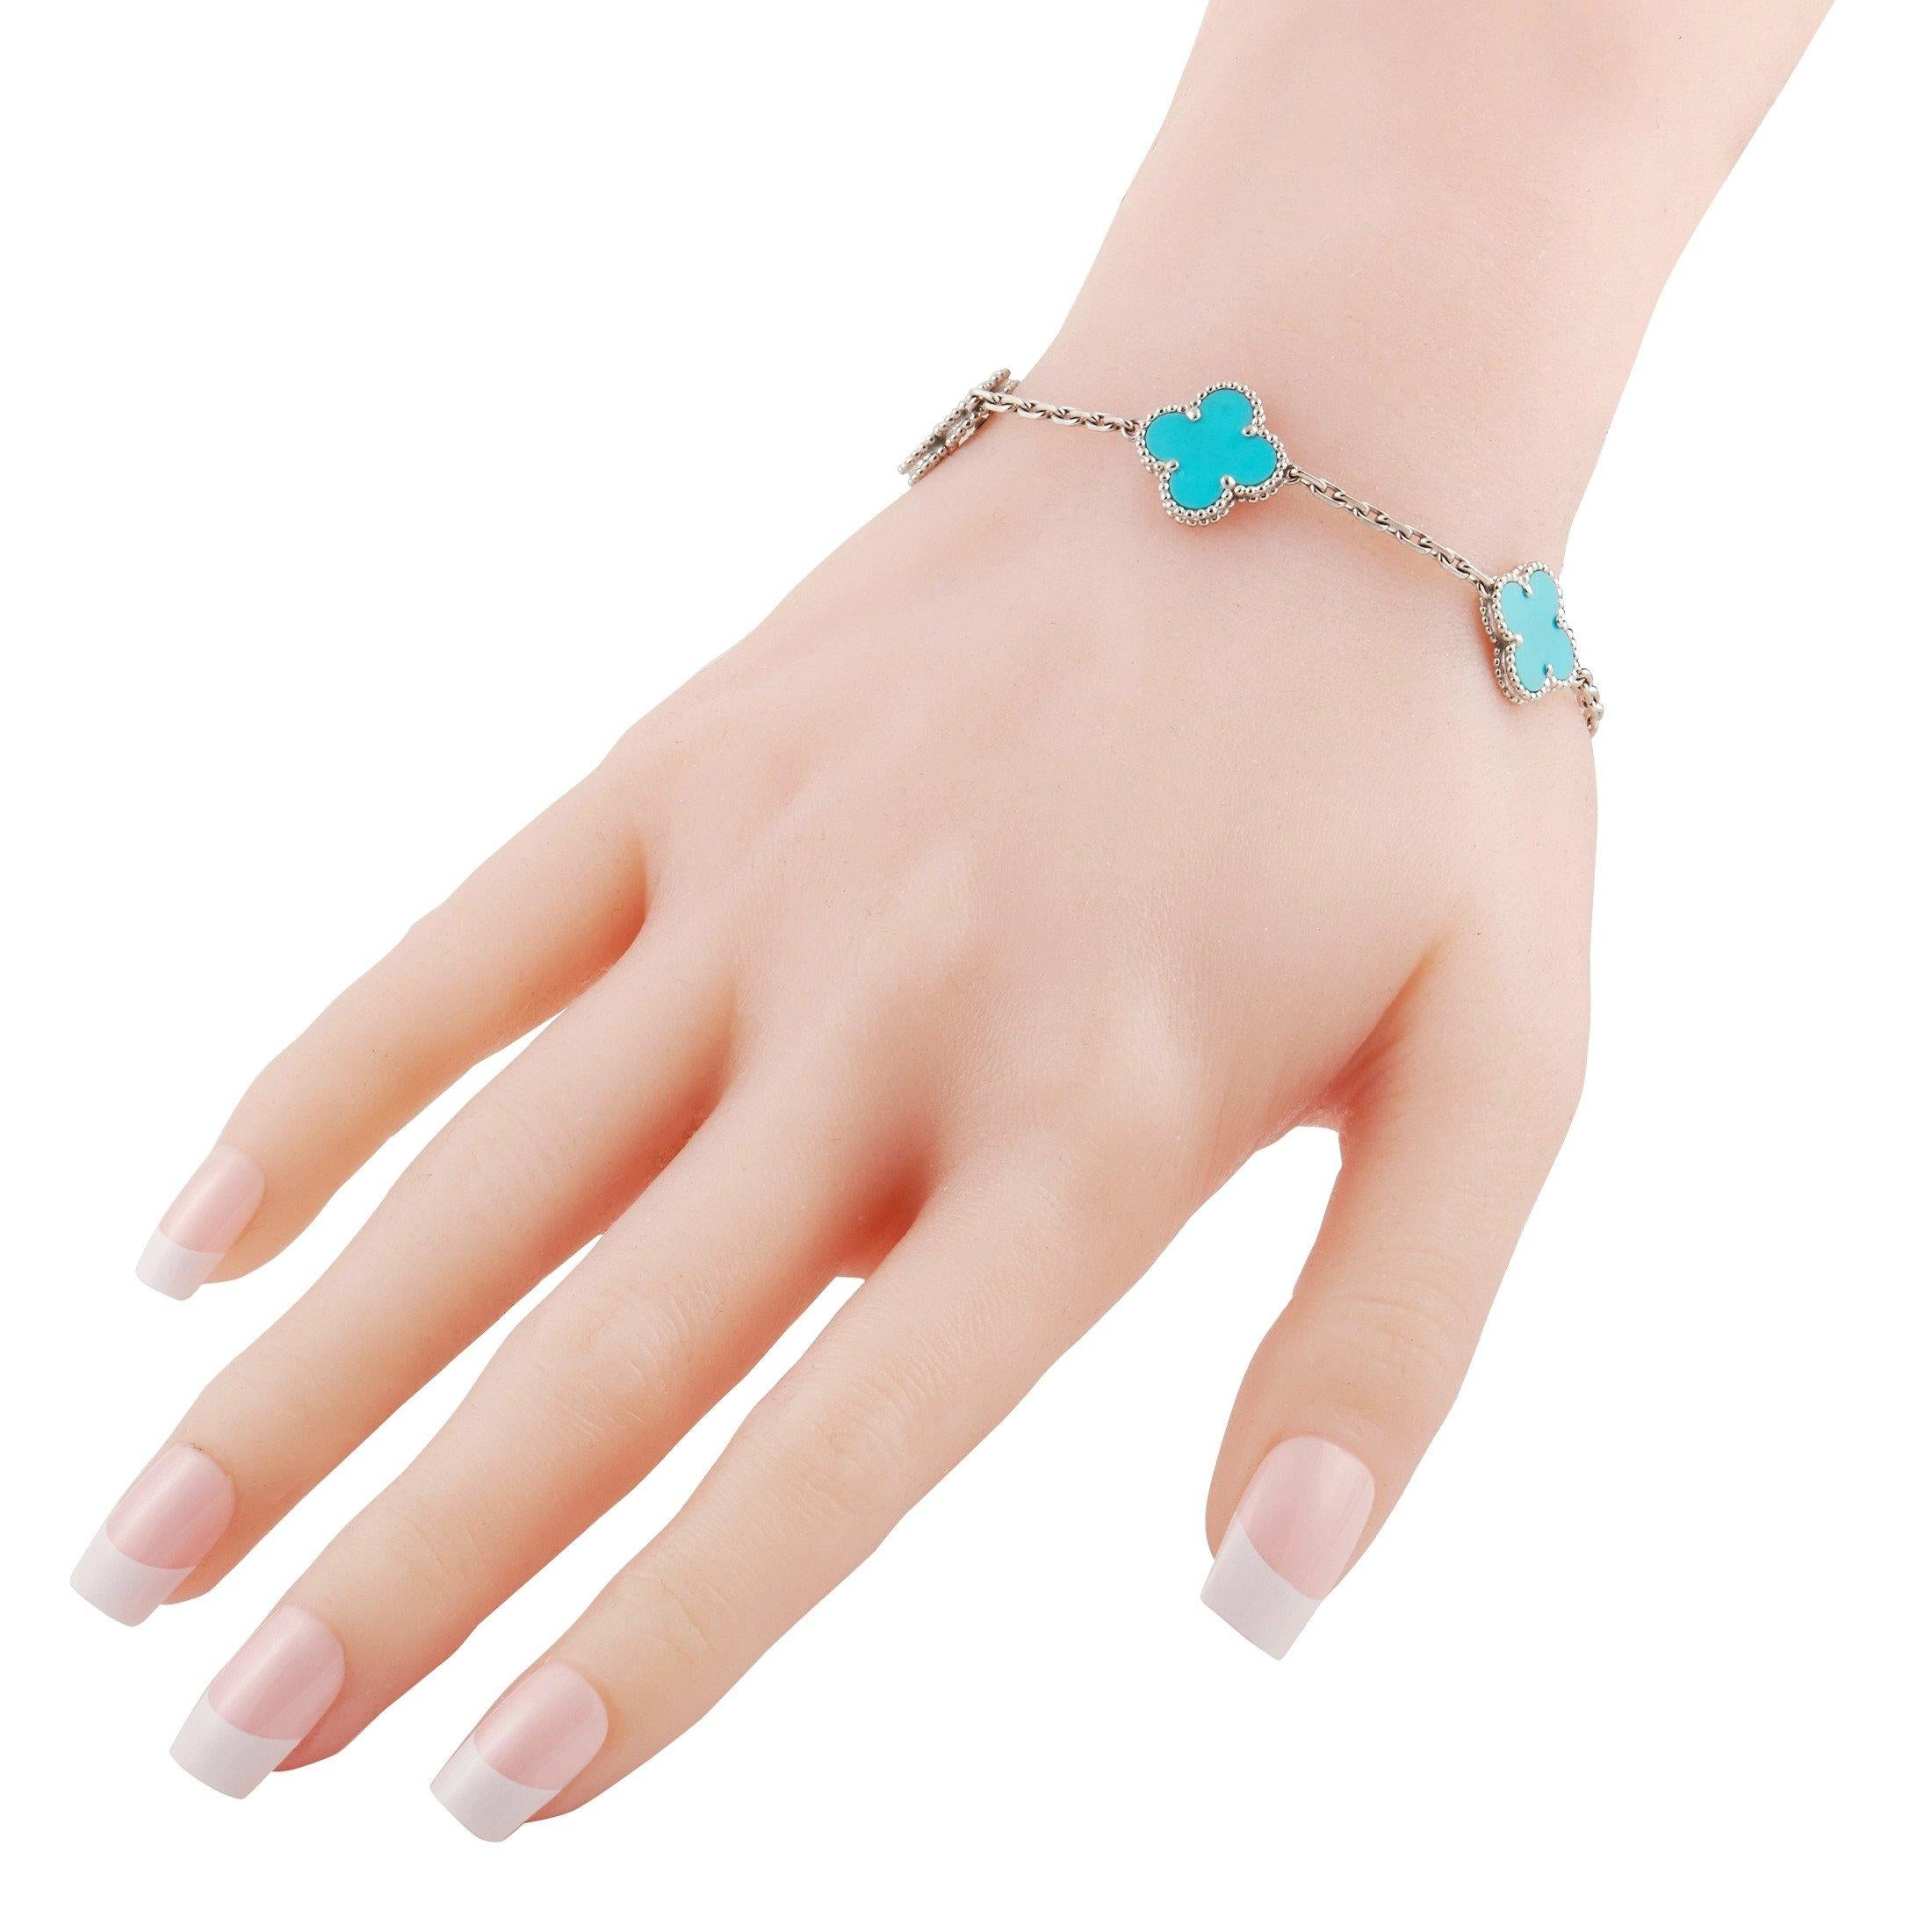 If you consider yourself a minimalist, this sophisticated Van Cleef & Arpels Alhambra bracelet will align with your aesthetic. Made from decadent 18K White Gold, this 7” long bracelet is accented by 5 of the brand’s iconic turquoise clovers.
 
 This